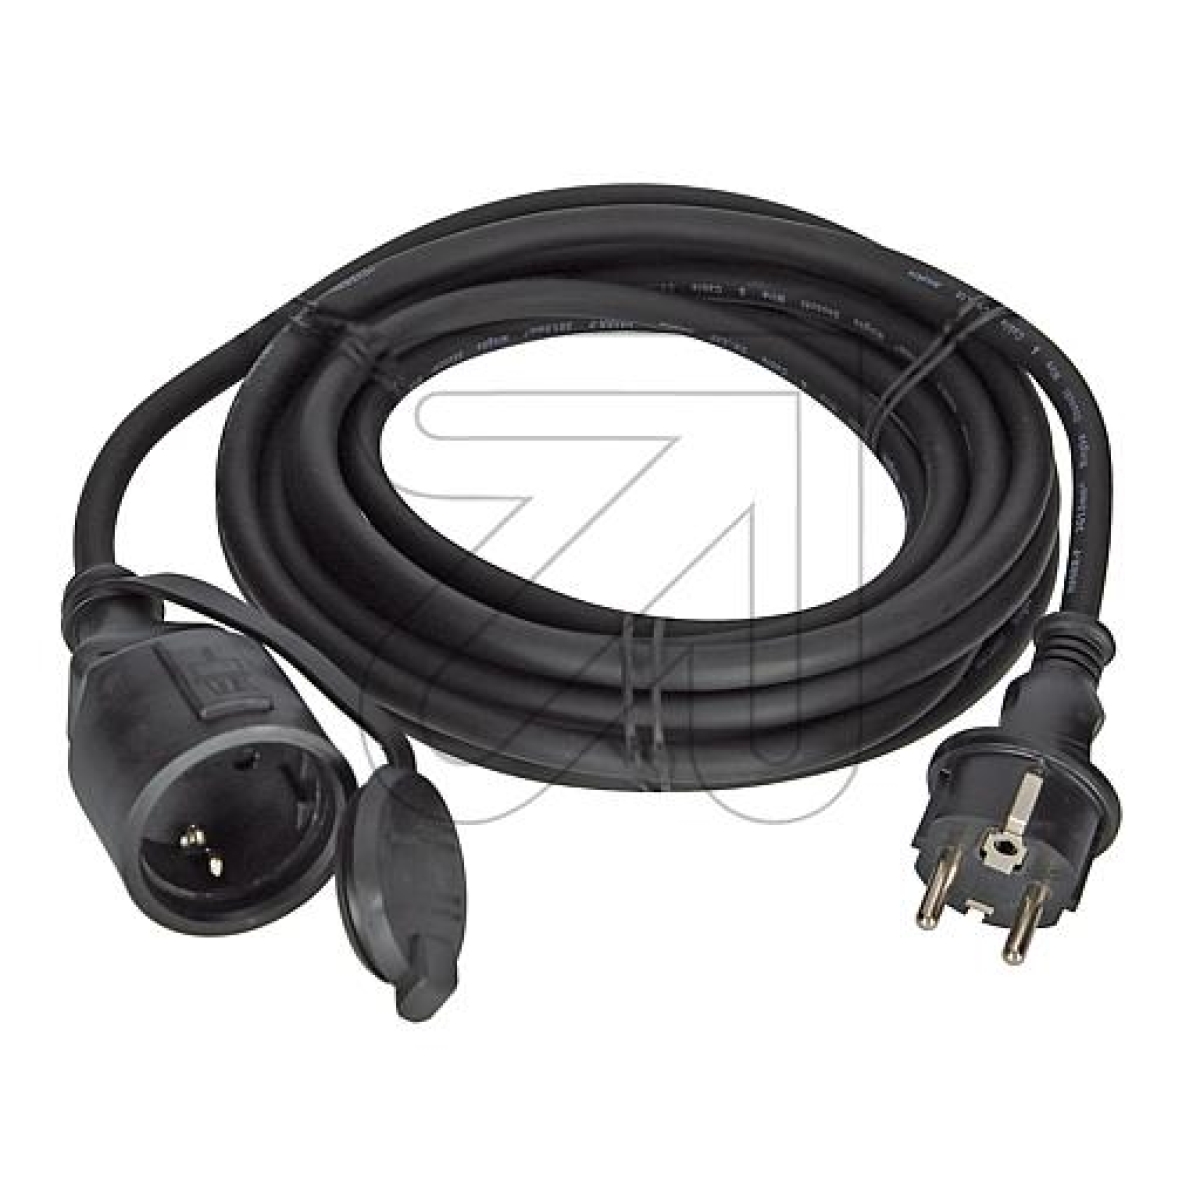 EGBRubber extension H07RN-F 3G1.5 black 5mArticle-No: 042665